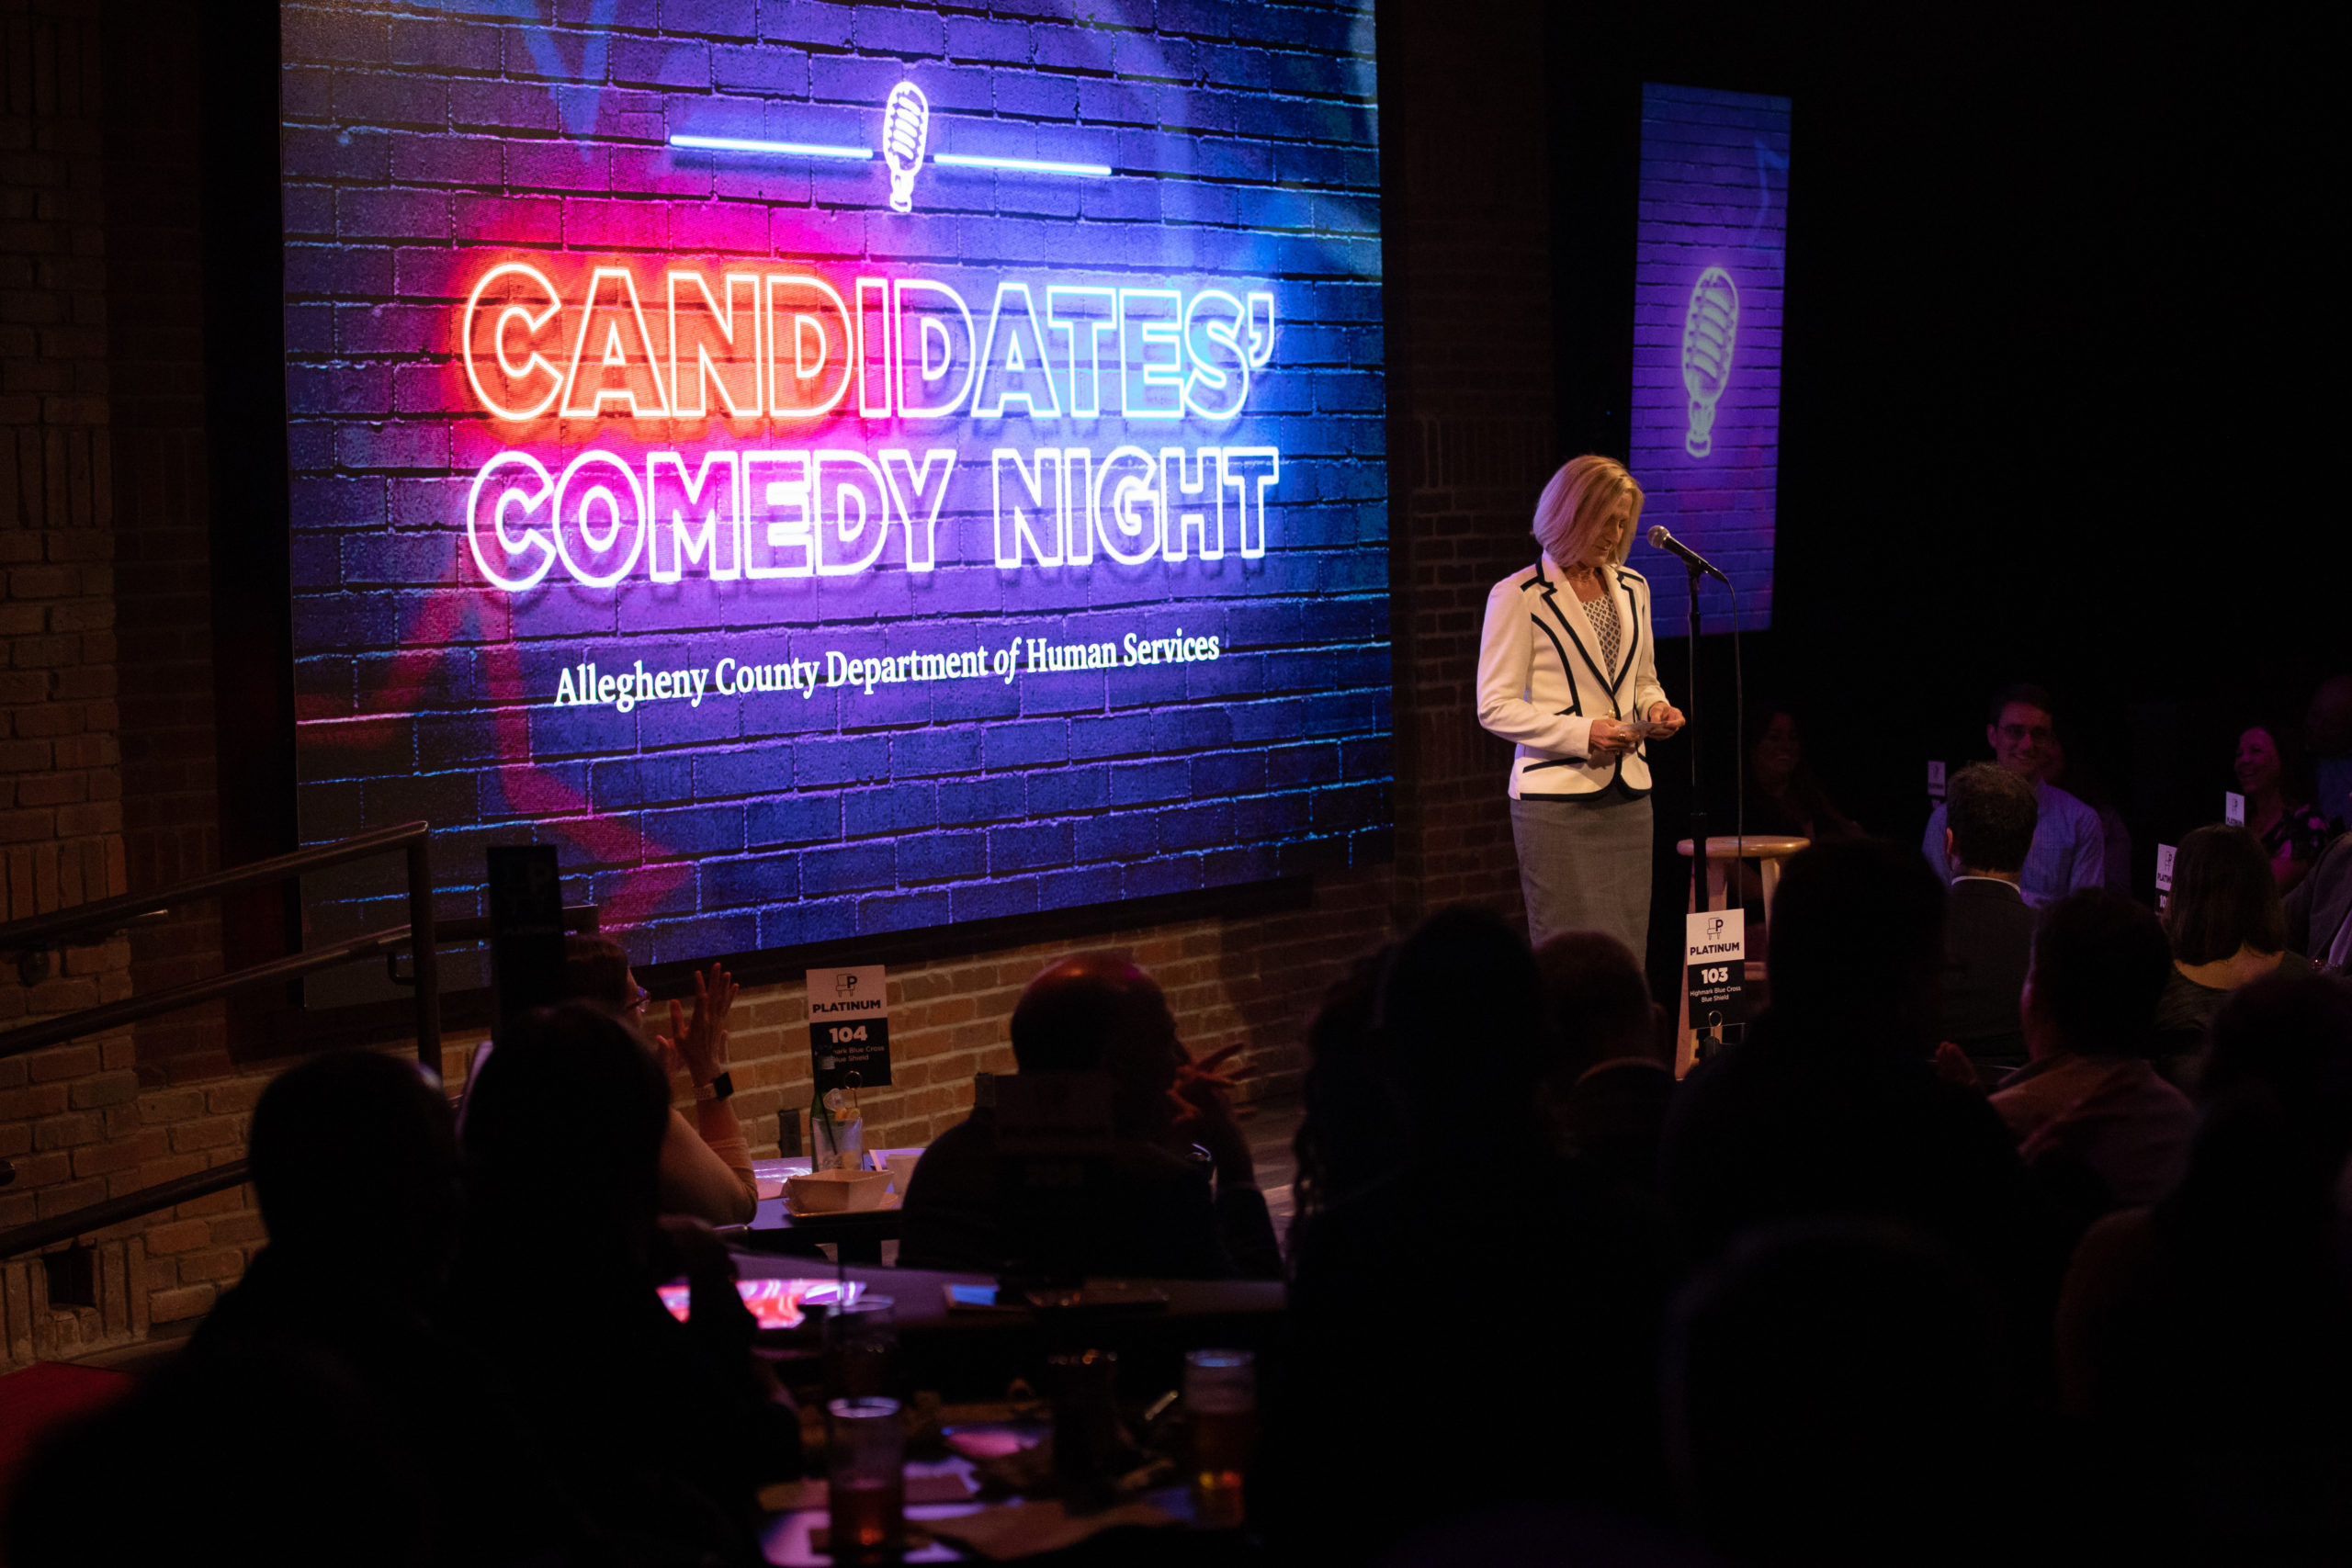 Candidates' Comedy Night stage